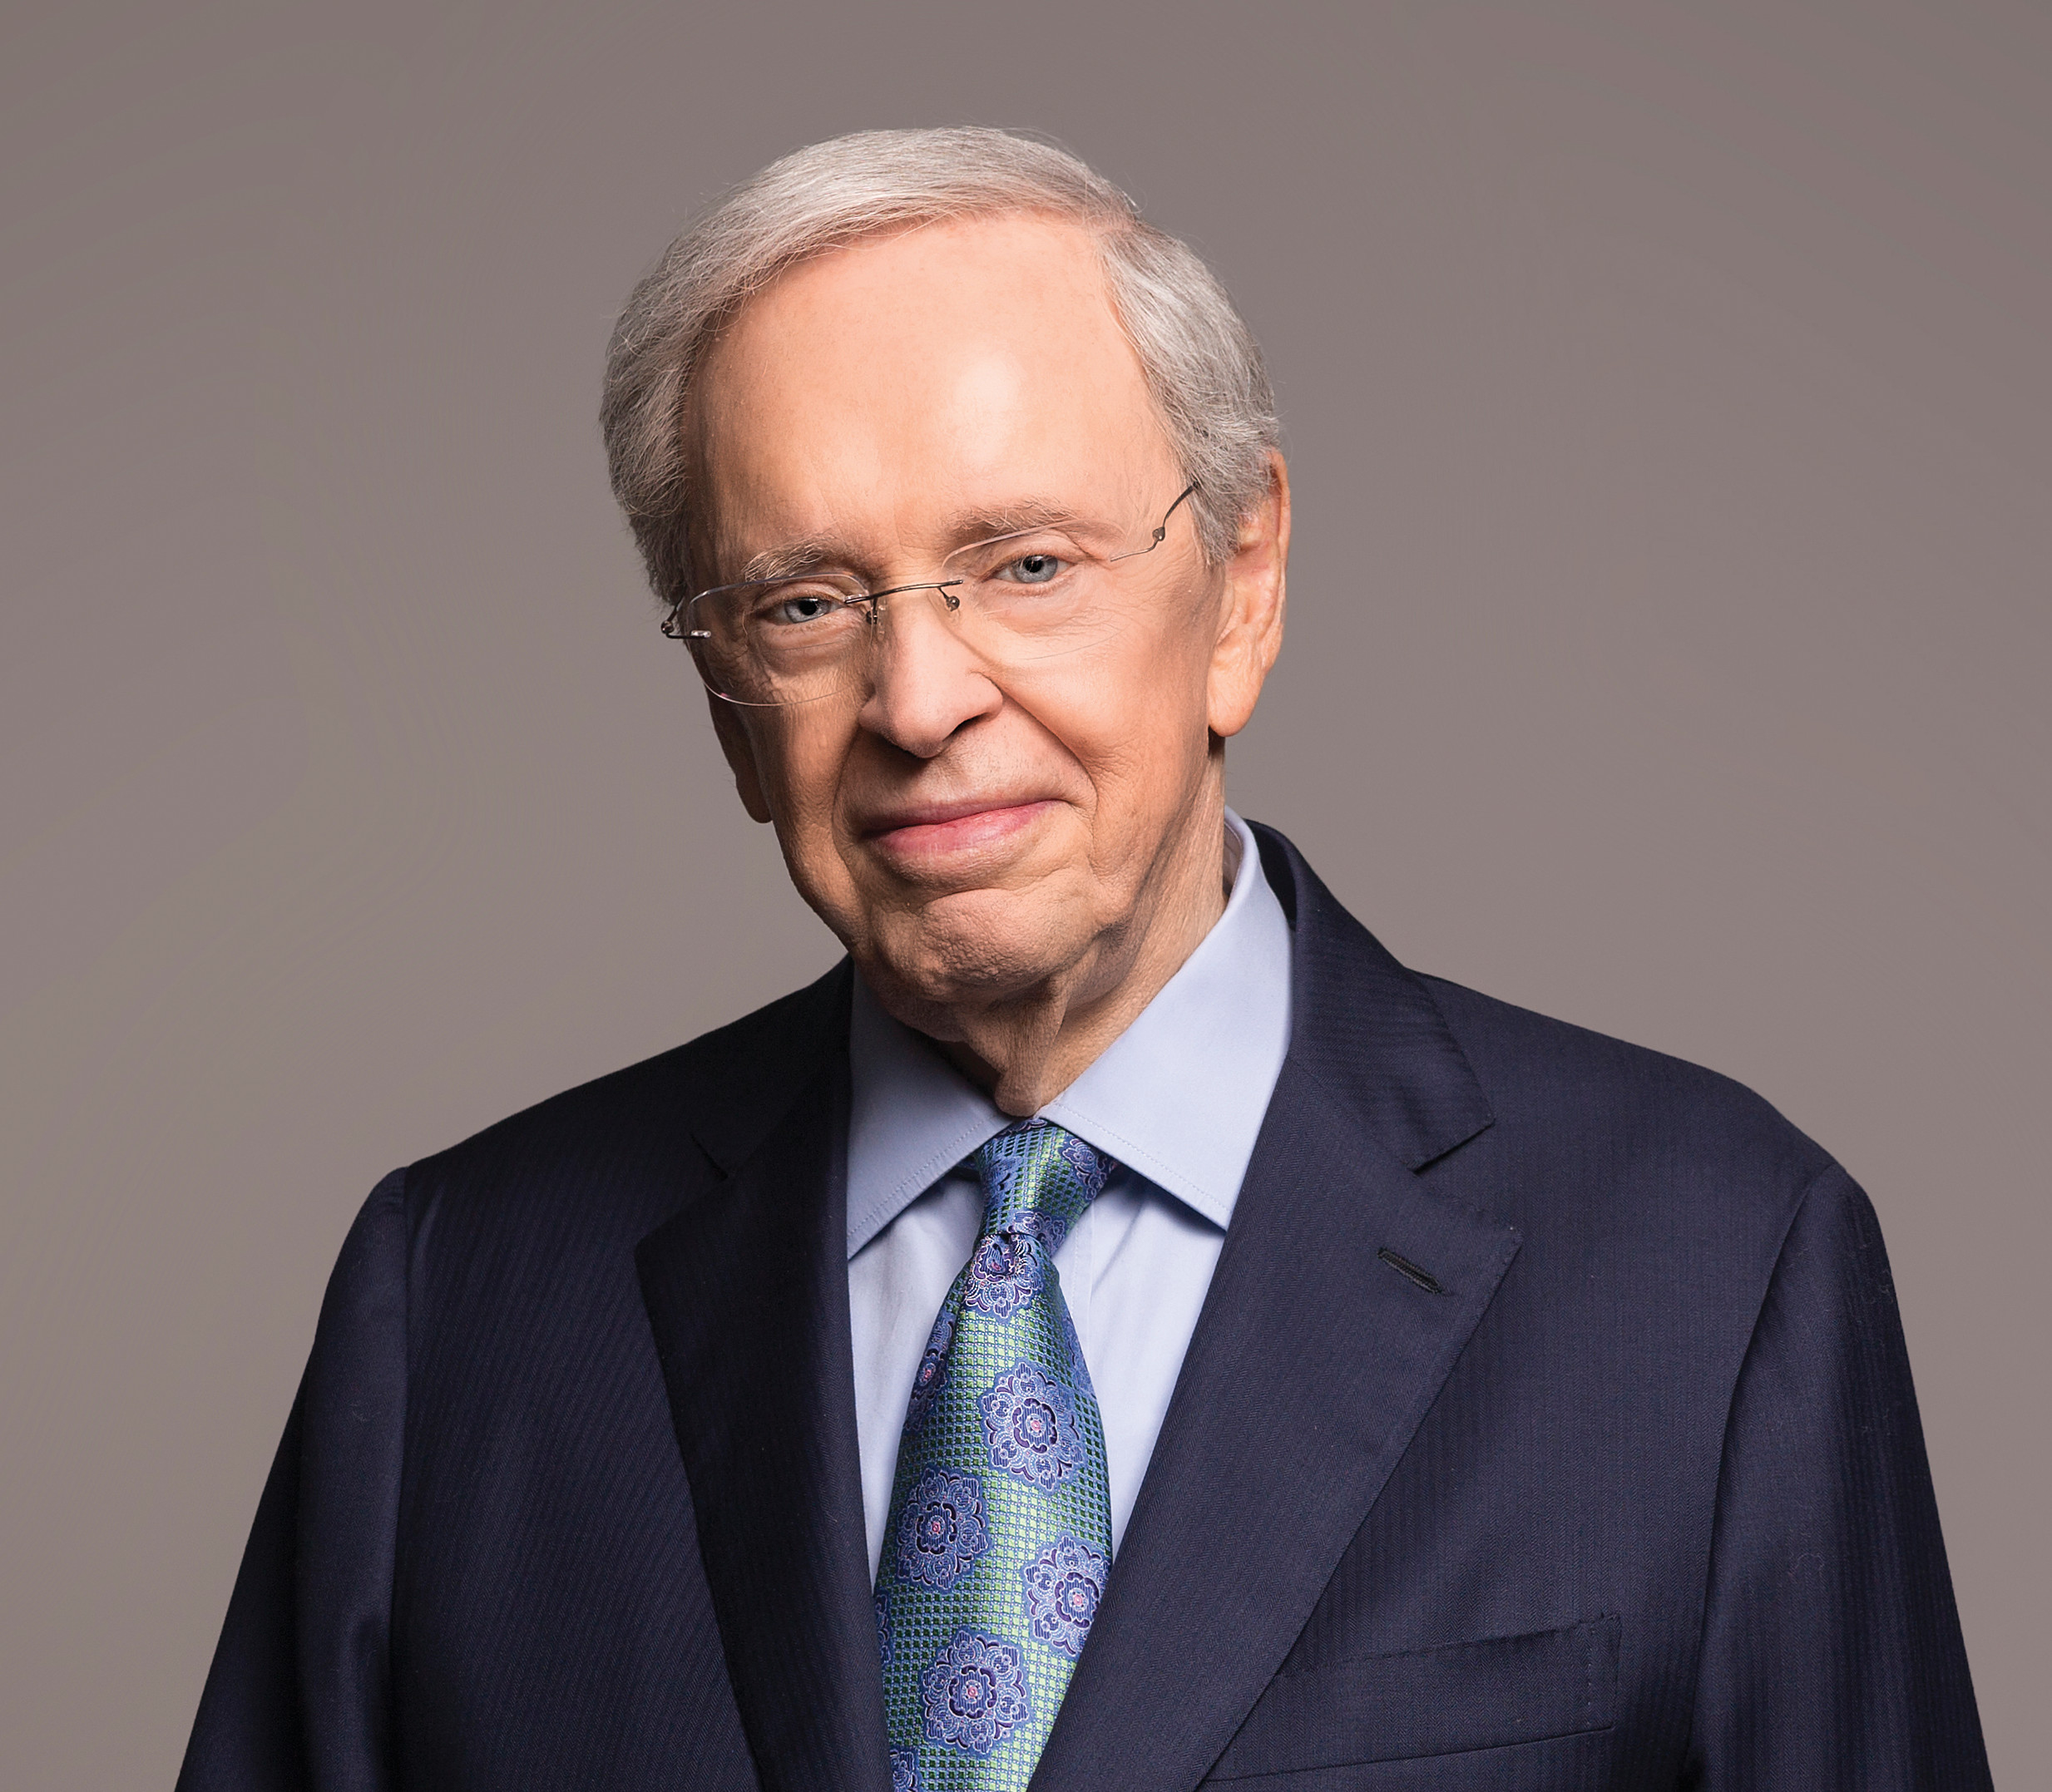 In Touch with Dr Charles Stanley